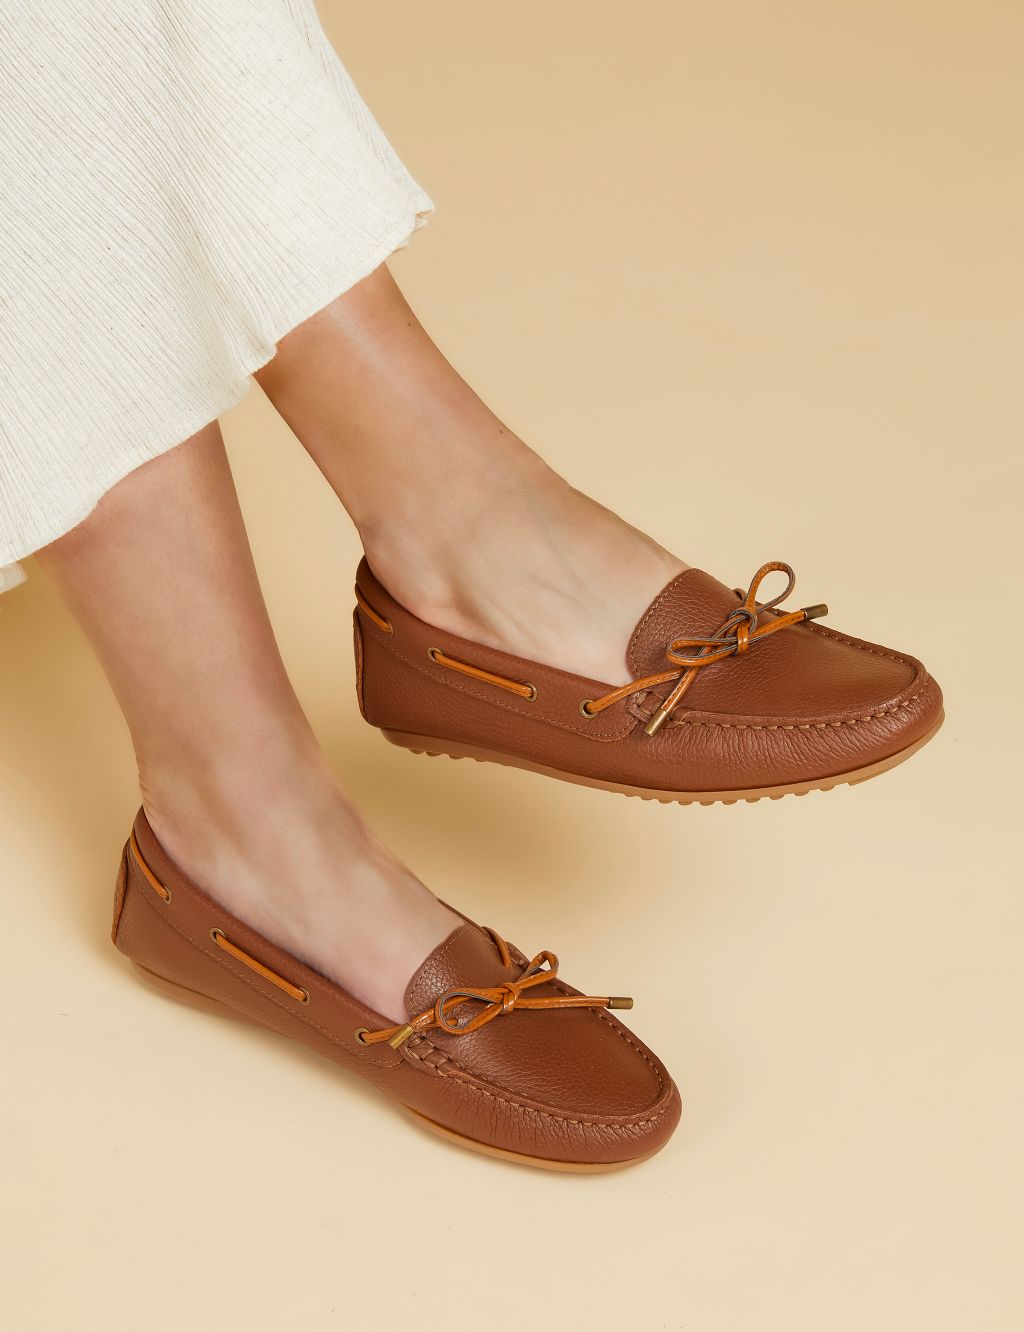 Leather Bow Slip On Flat Boat Shoes